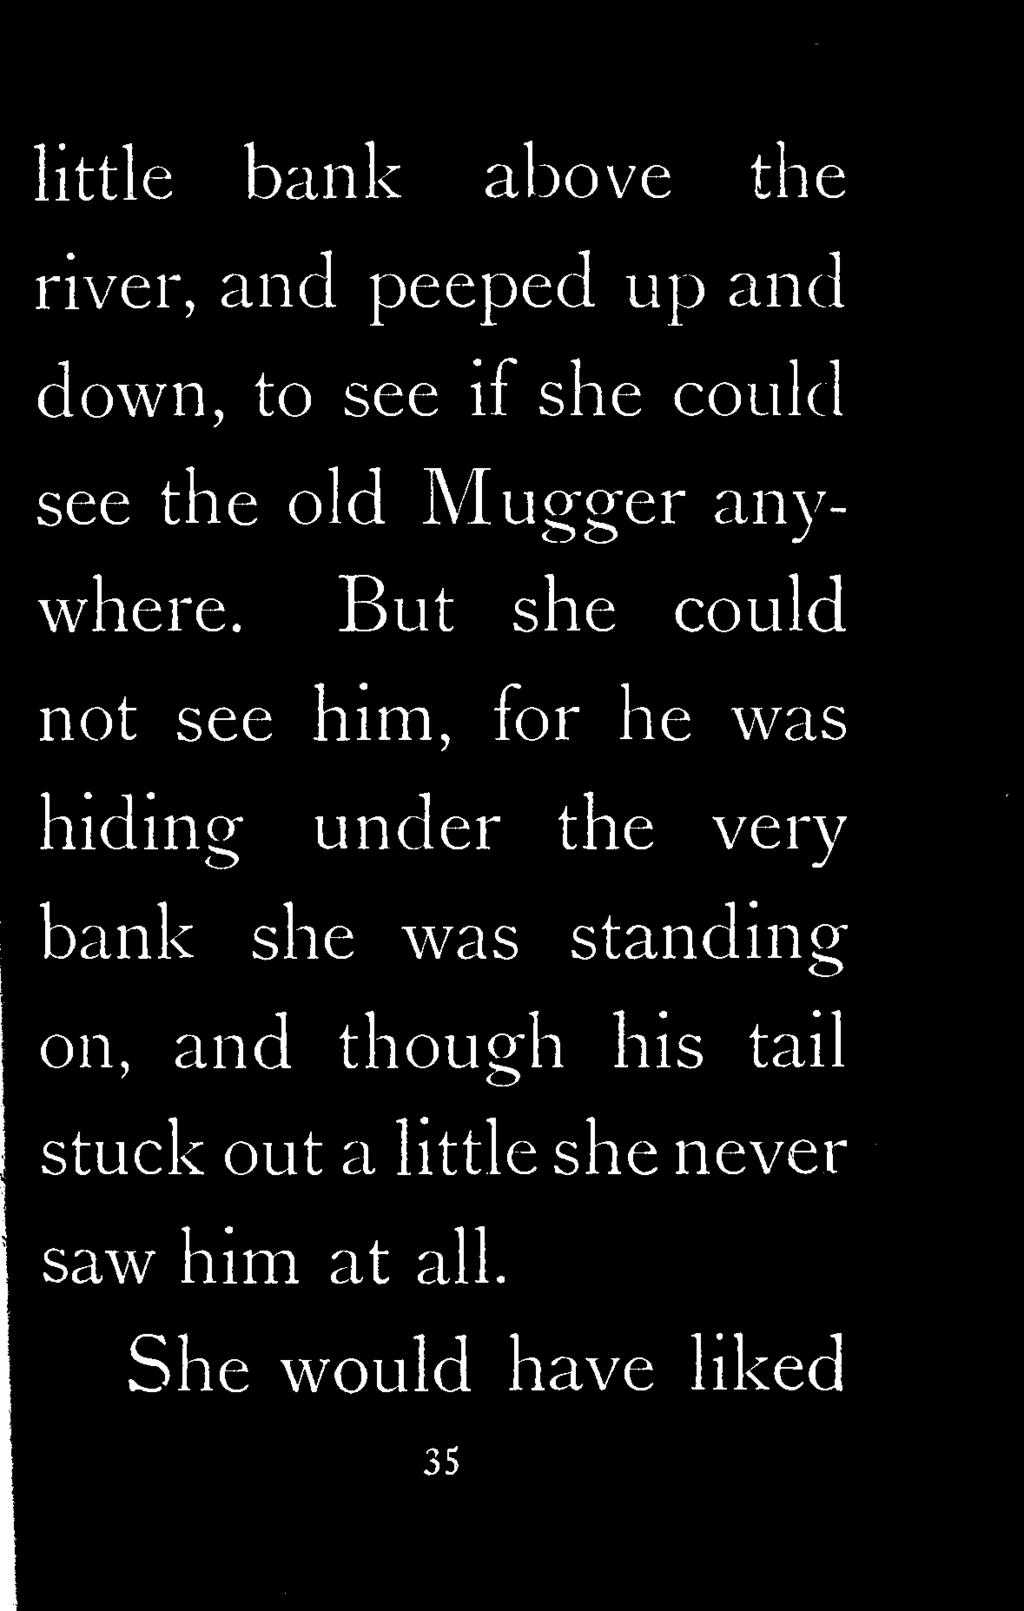 But she could not see him, for he was hiding under the very bank she